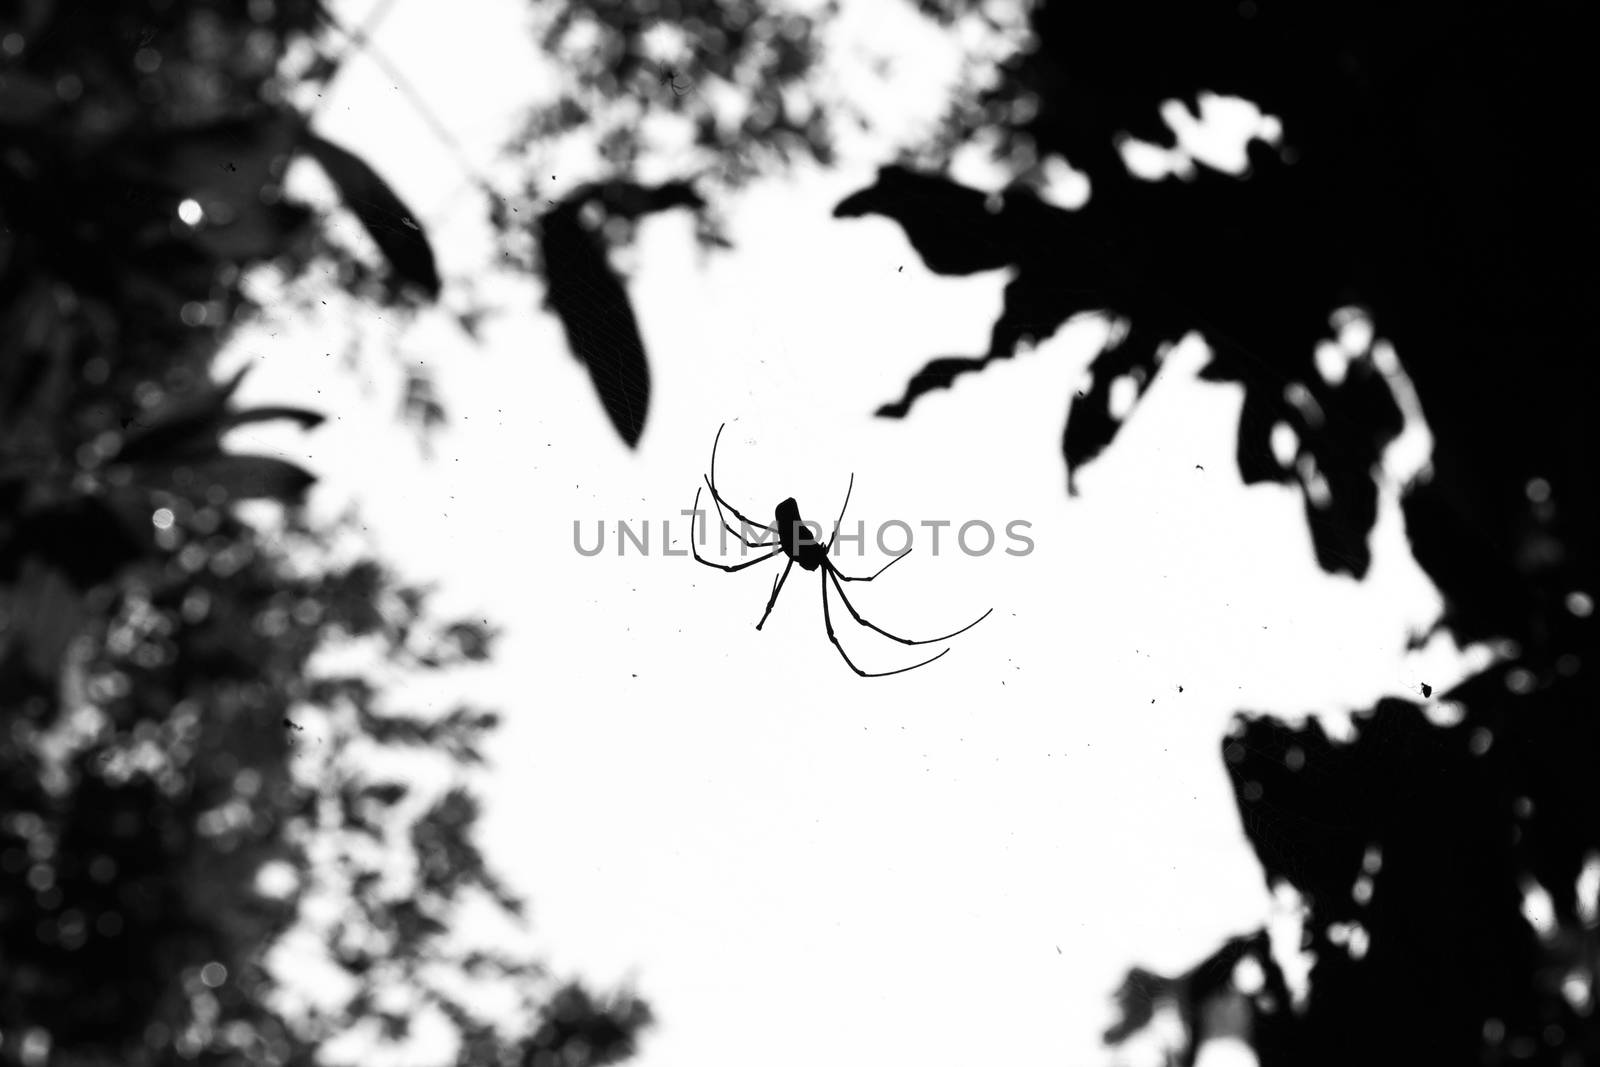 Spider on spider web in nature, Black and white